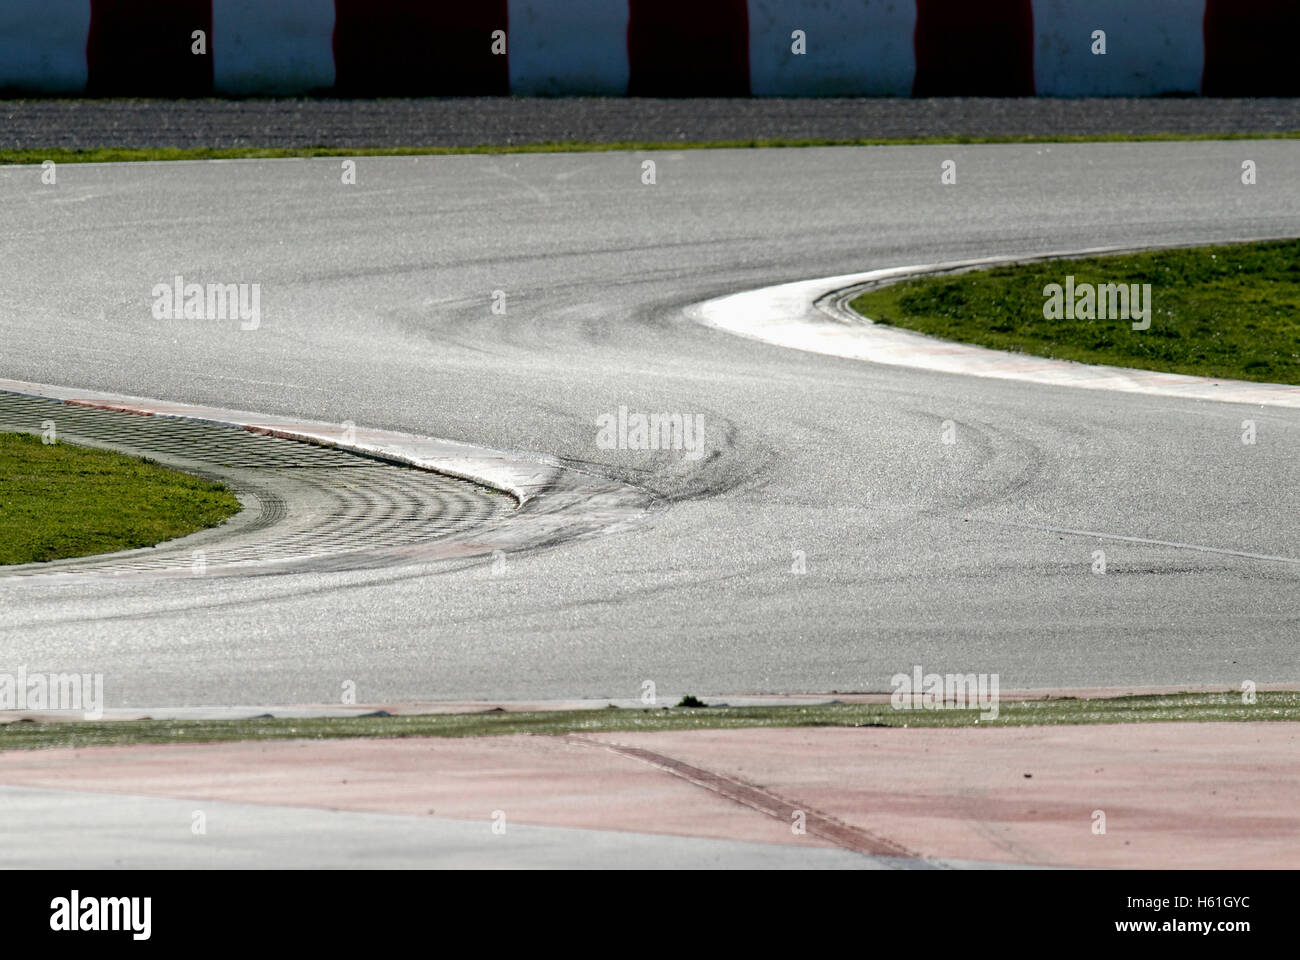 Motorsports, s-curve at the Circuit de Catalunya race track in Barcelona, Spain, Europe Stock Photo